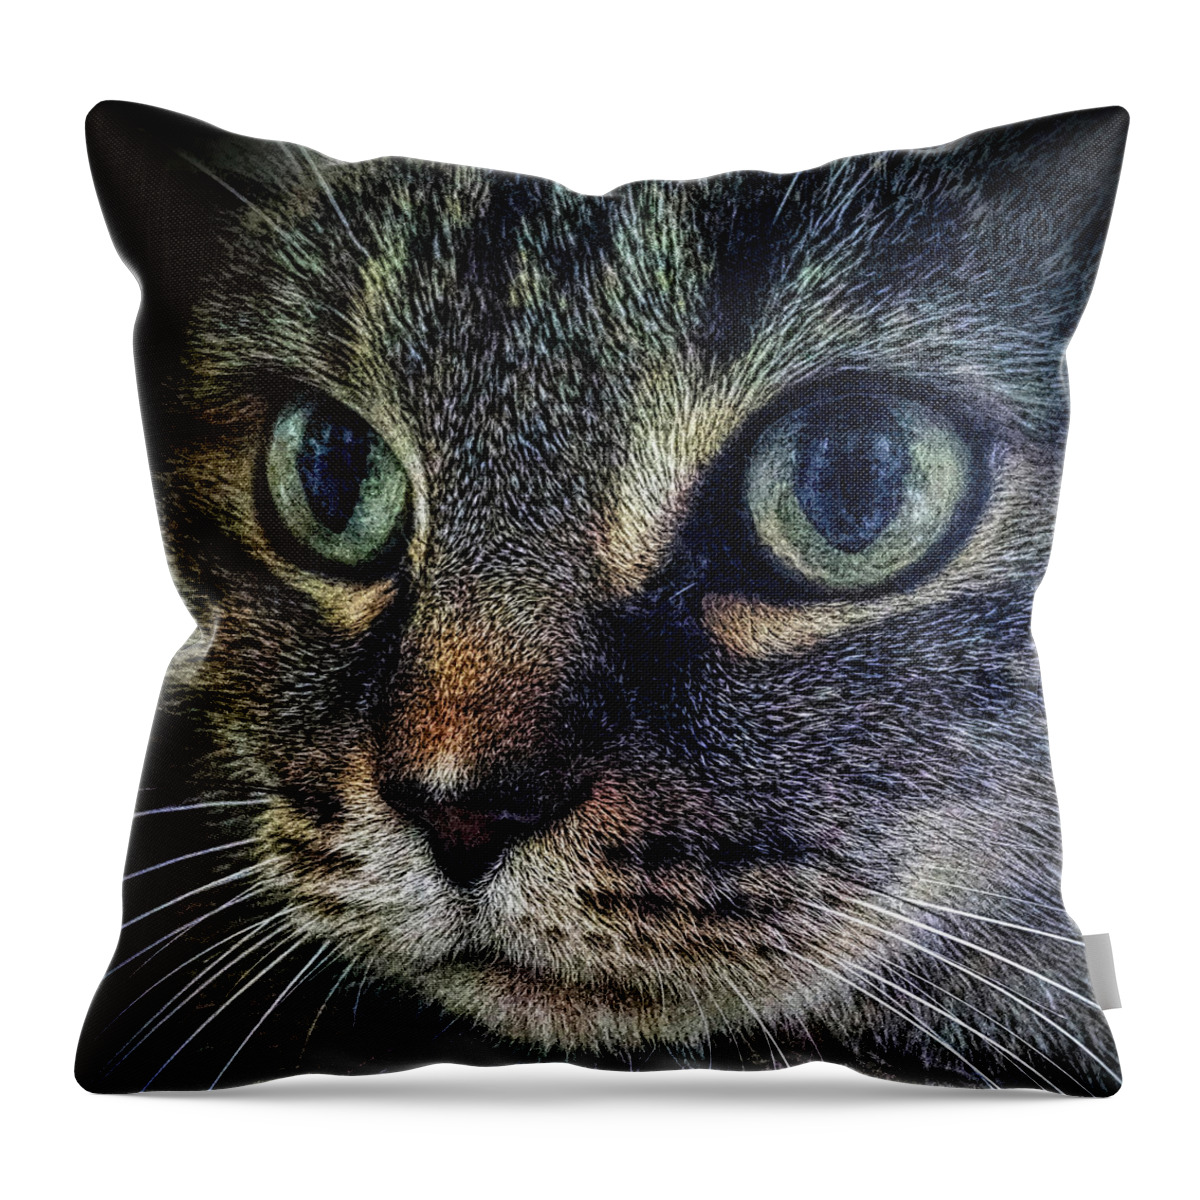 Cat Throw Pillow featuring the photograph Cat Eyes by Donna Proctor